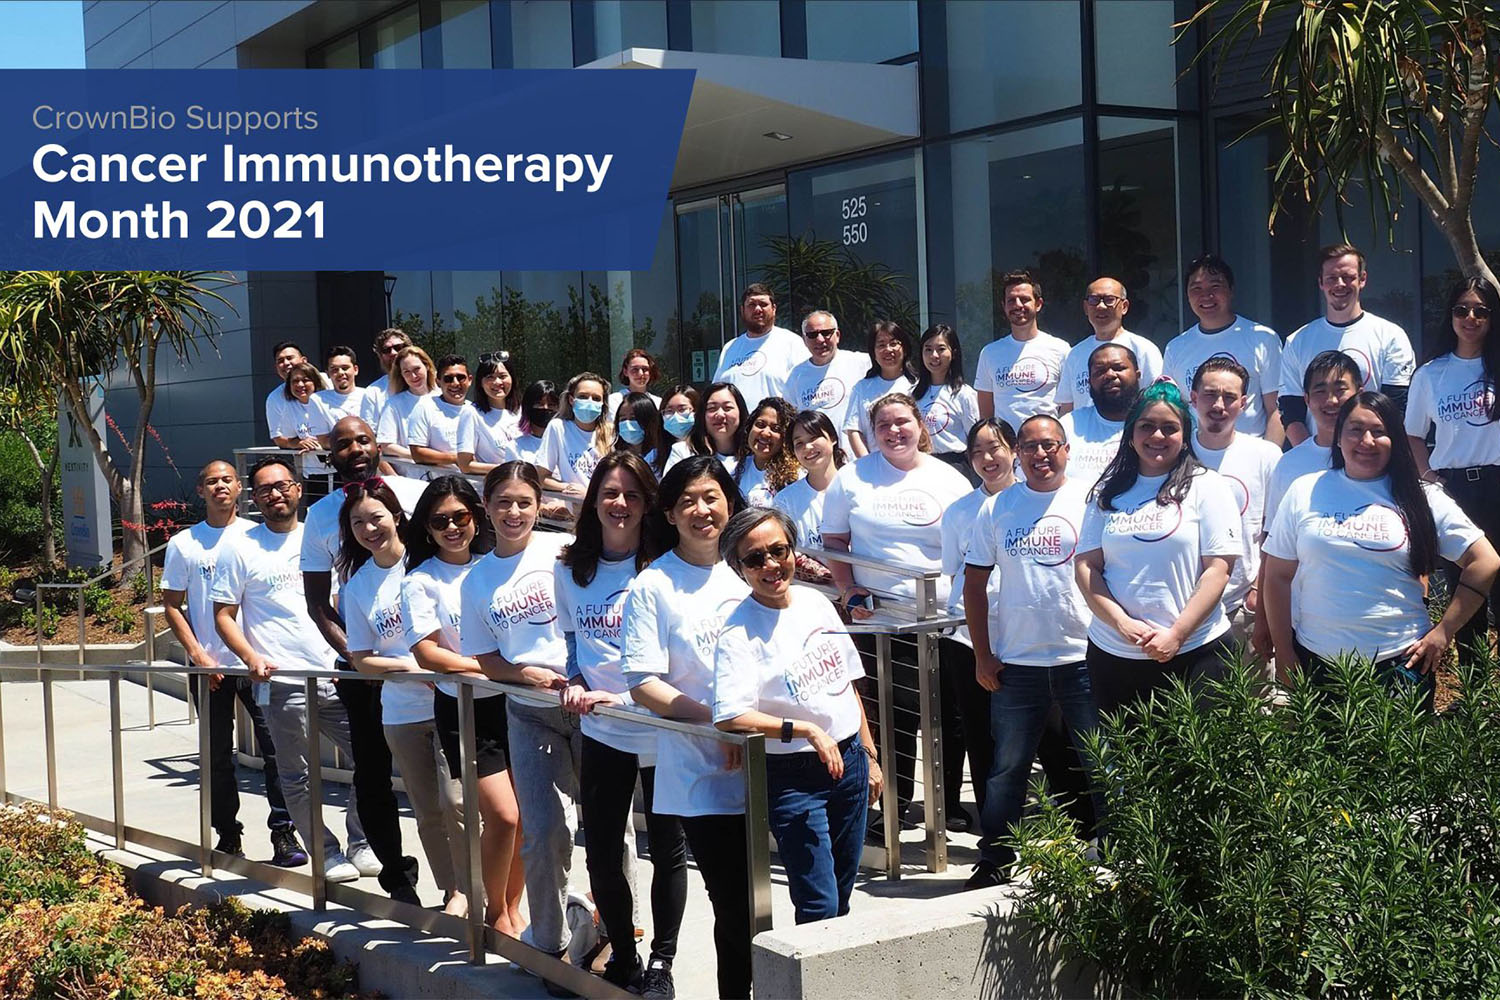 Employees of Crown Bioscience join the Cancer Research Institute and thousands of others on social media for a global #Immune2Cancer Day of awareness of the power of immunotherapy to transform cancer treatment.